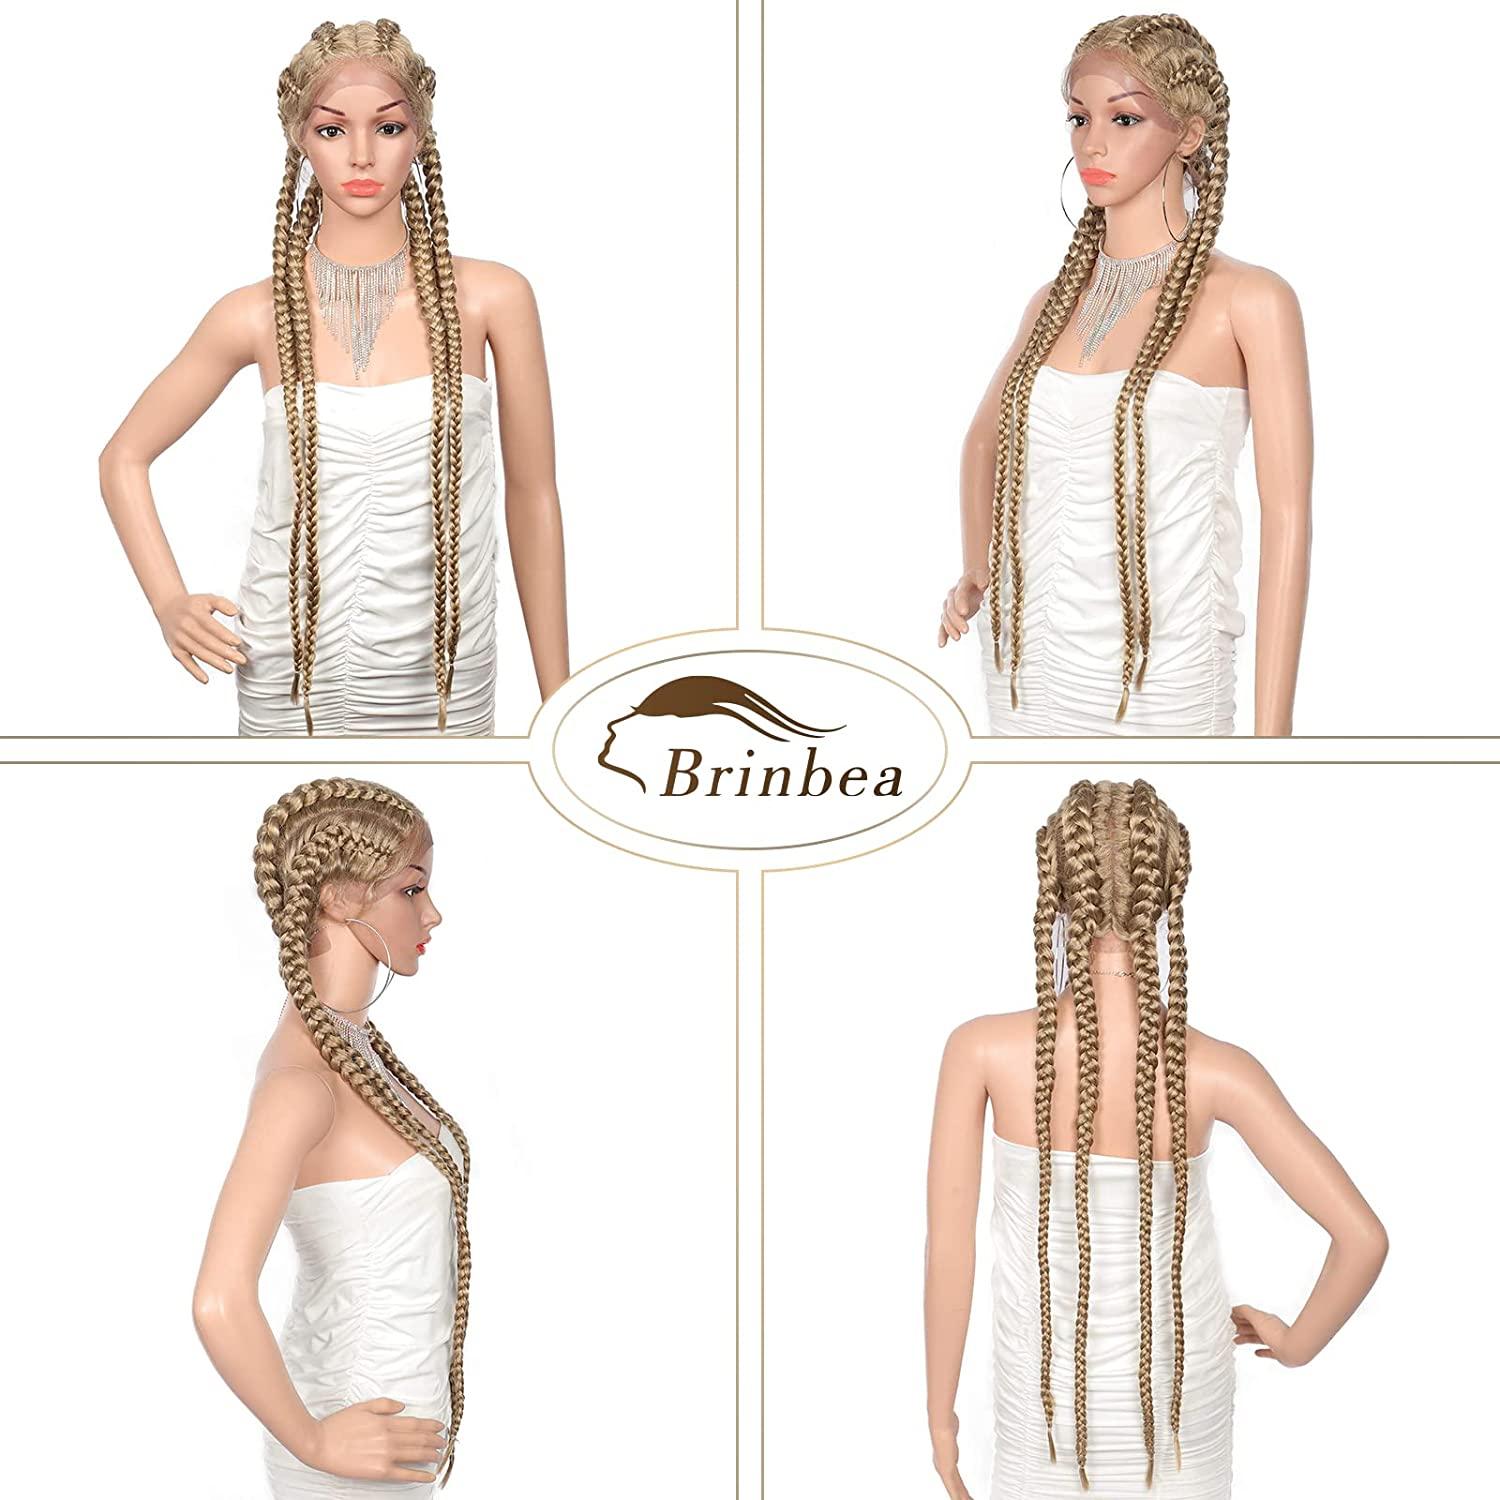 Jumbo Braided Brinbea Braided Wig With Full Lace Front In Black/Brown/Blonde,  Heat Resistant And Free Box Braids For Babies From Bkebeautyhair, $44.01